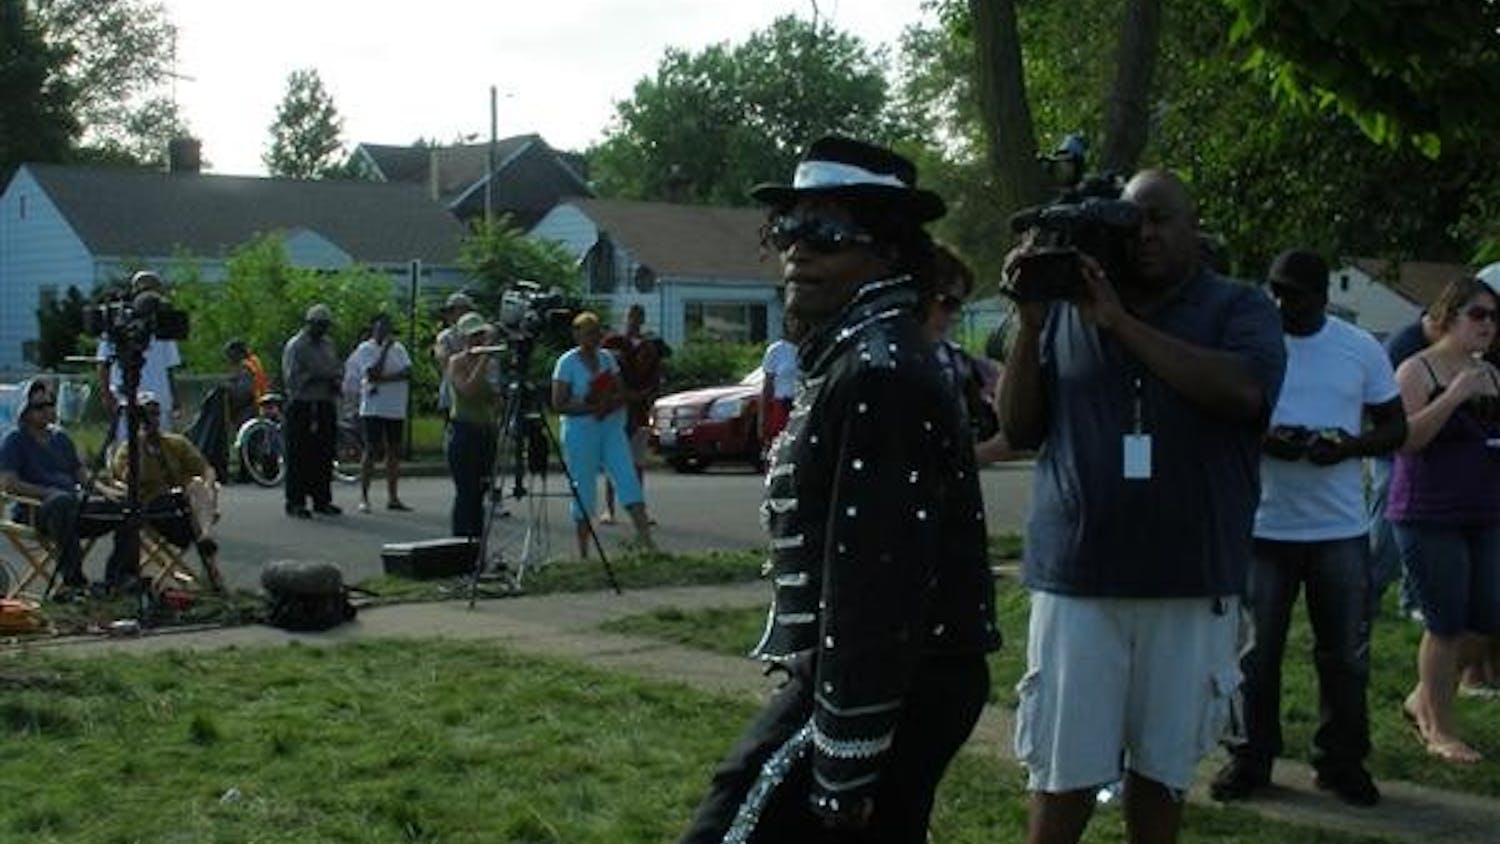  Antonio Wilson, dressed in full Jackson stage garb, excites the crowd of Jackson fans Friday morning on the front lawn of Jackson's boyhood home in Gary.